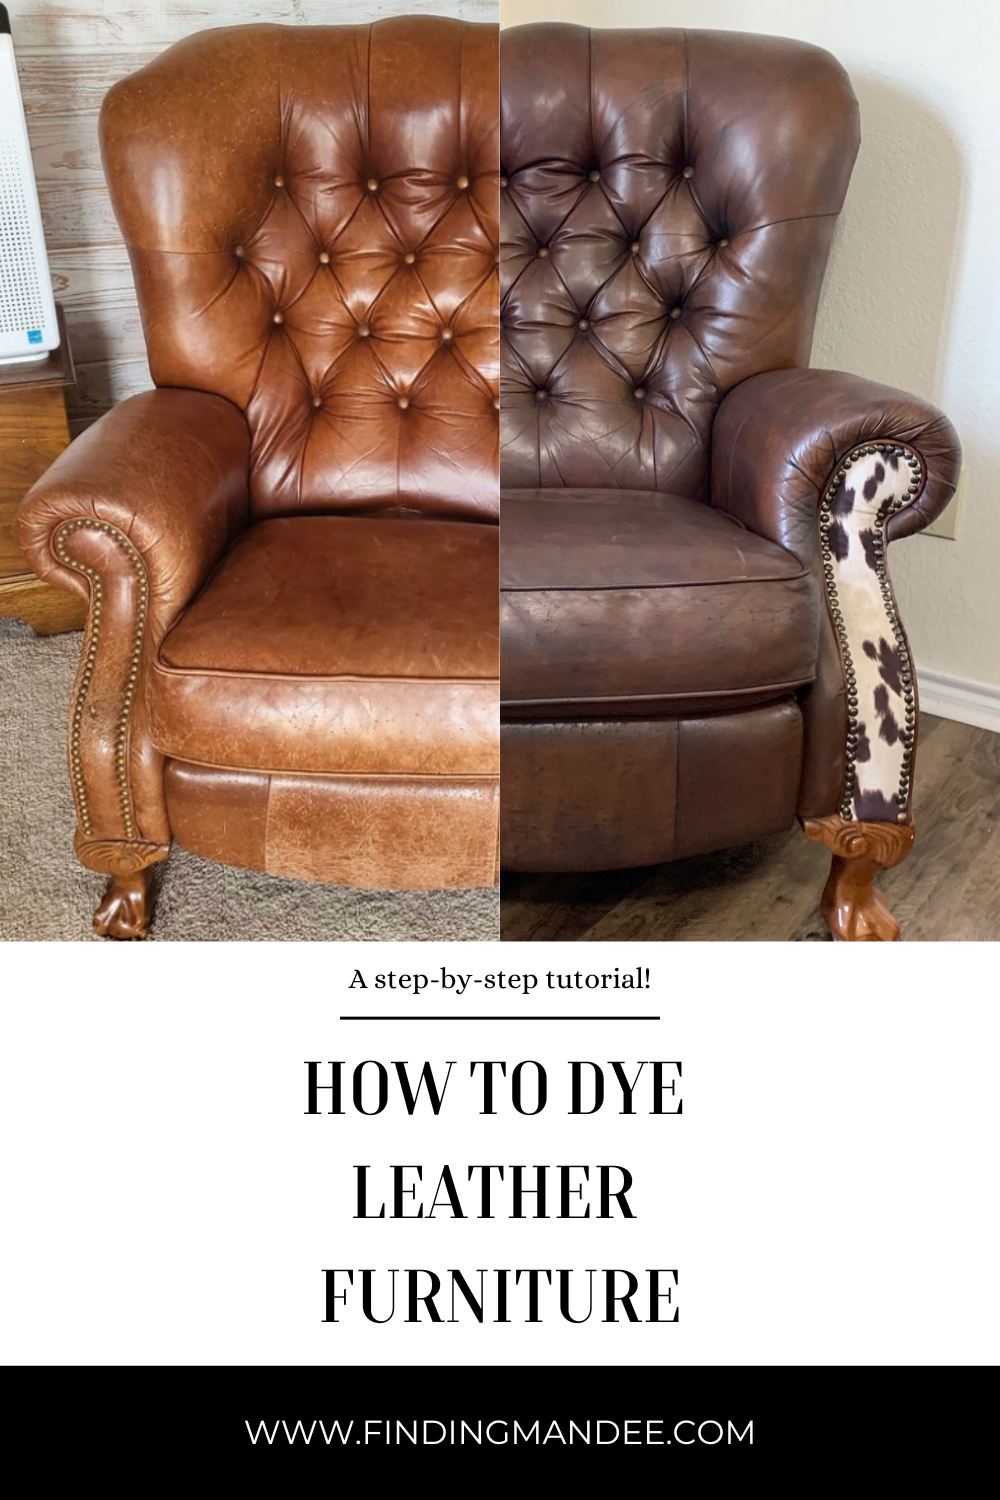 How to Dye Leather Chairs - Southern Hospitality